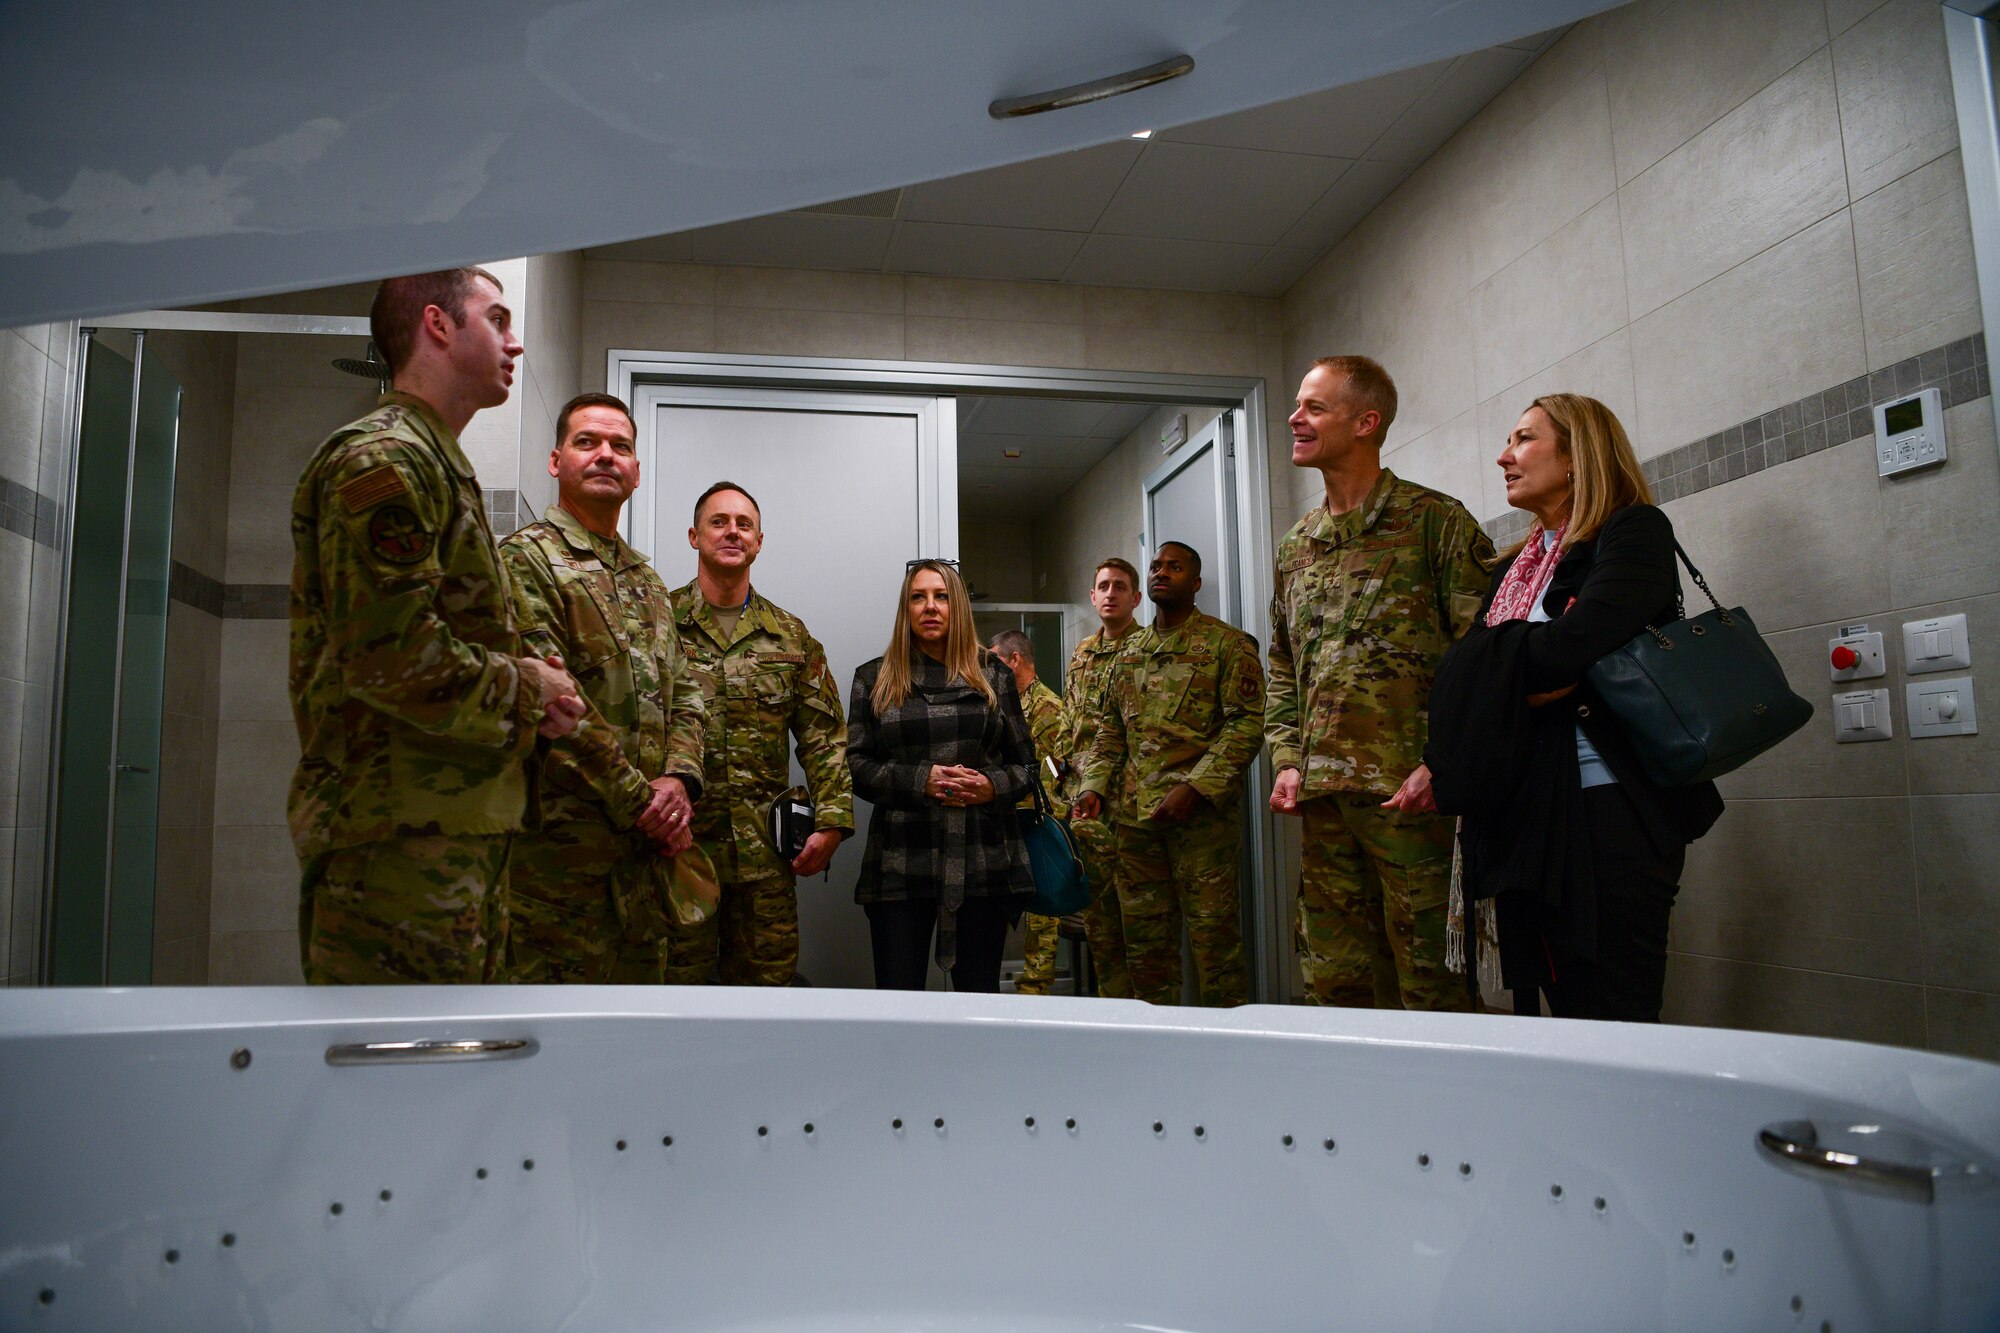 U.S. Air Force Maj. Gen. Derek France, Third Air Force commander, right, and his spouse Mrs. Amanda France, are briefed on the float pod inside of the 31st Medical Group Comprehensive Operational Medicine for Battle Ready Airmen clinic at Aviano Air Base, Italy, Nov. 22, 2022. The clinic houses rehabilitation equipment, such as gait retraining software, anti-gravity treadmills for rehab, recovery modalities and a float pod for sensory deprivation. (U.S. Air Force photo by Senior Airman Brooke Moeder)